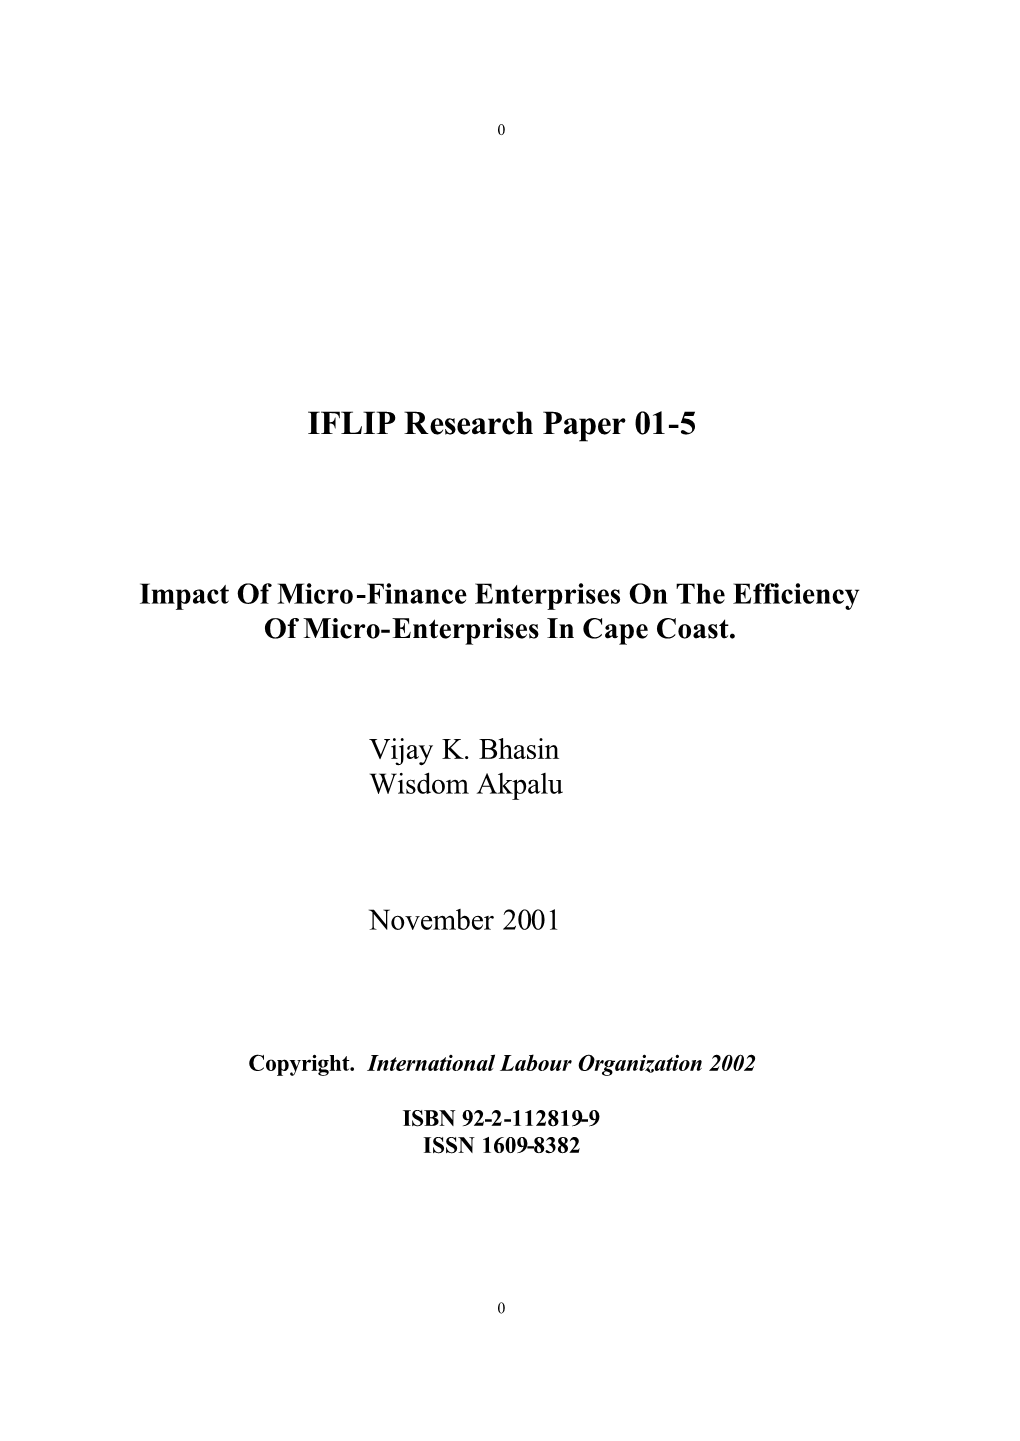 IFLIP Research Paper 01-5